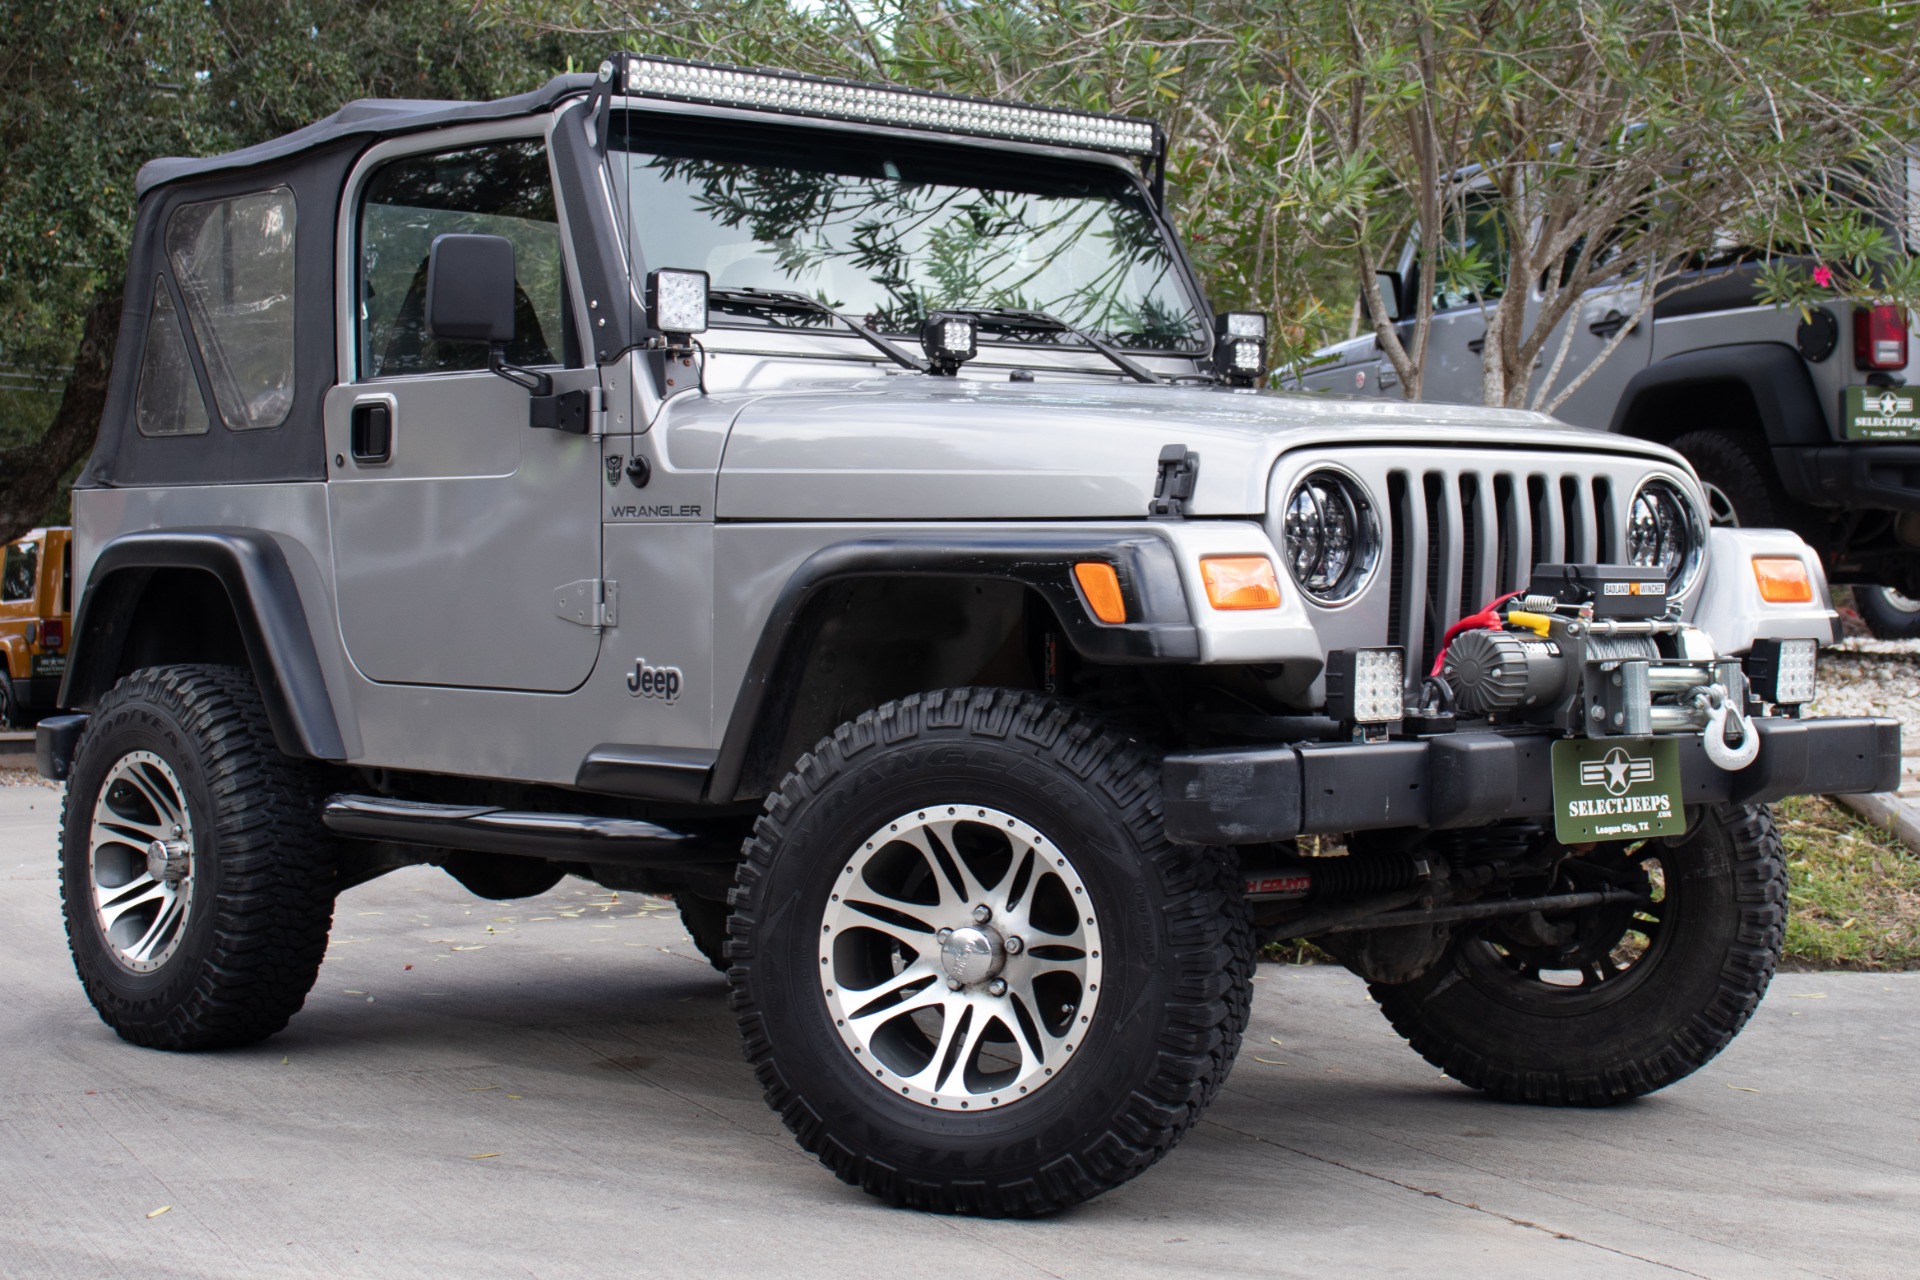 Used 2001 Jeep Wrangler SE For Sale ($12,995) | Select Jeeps Inc. Stock  #360980